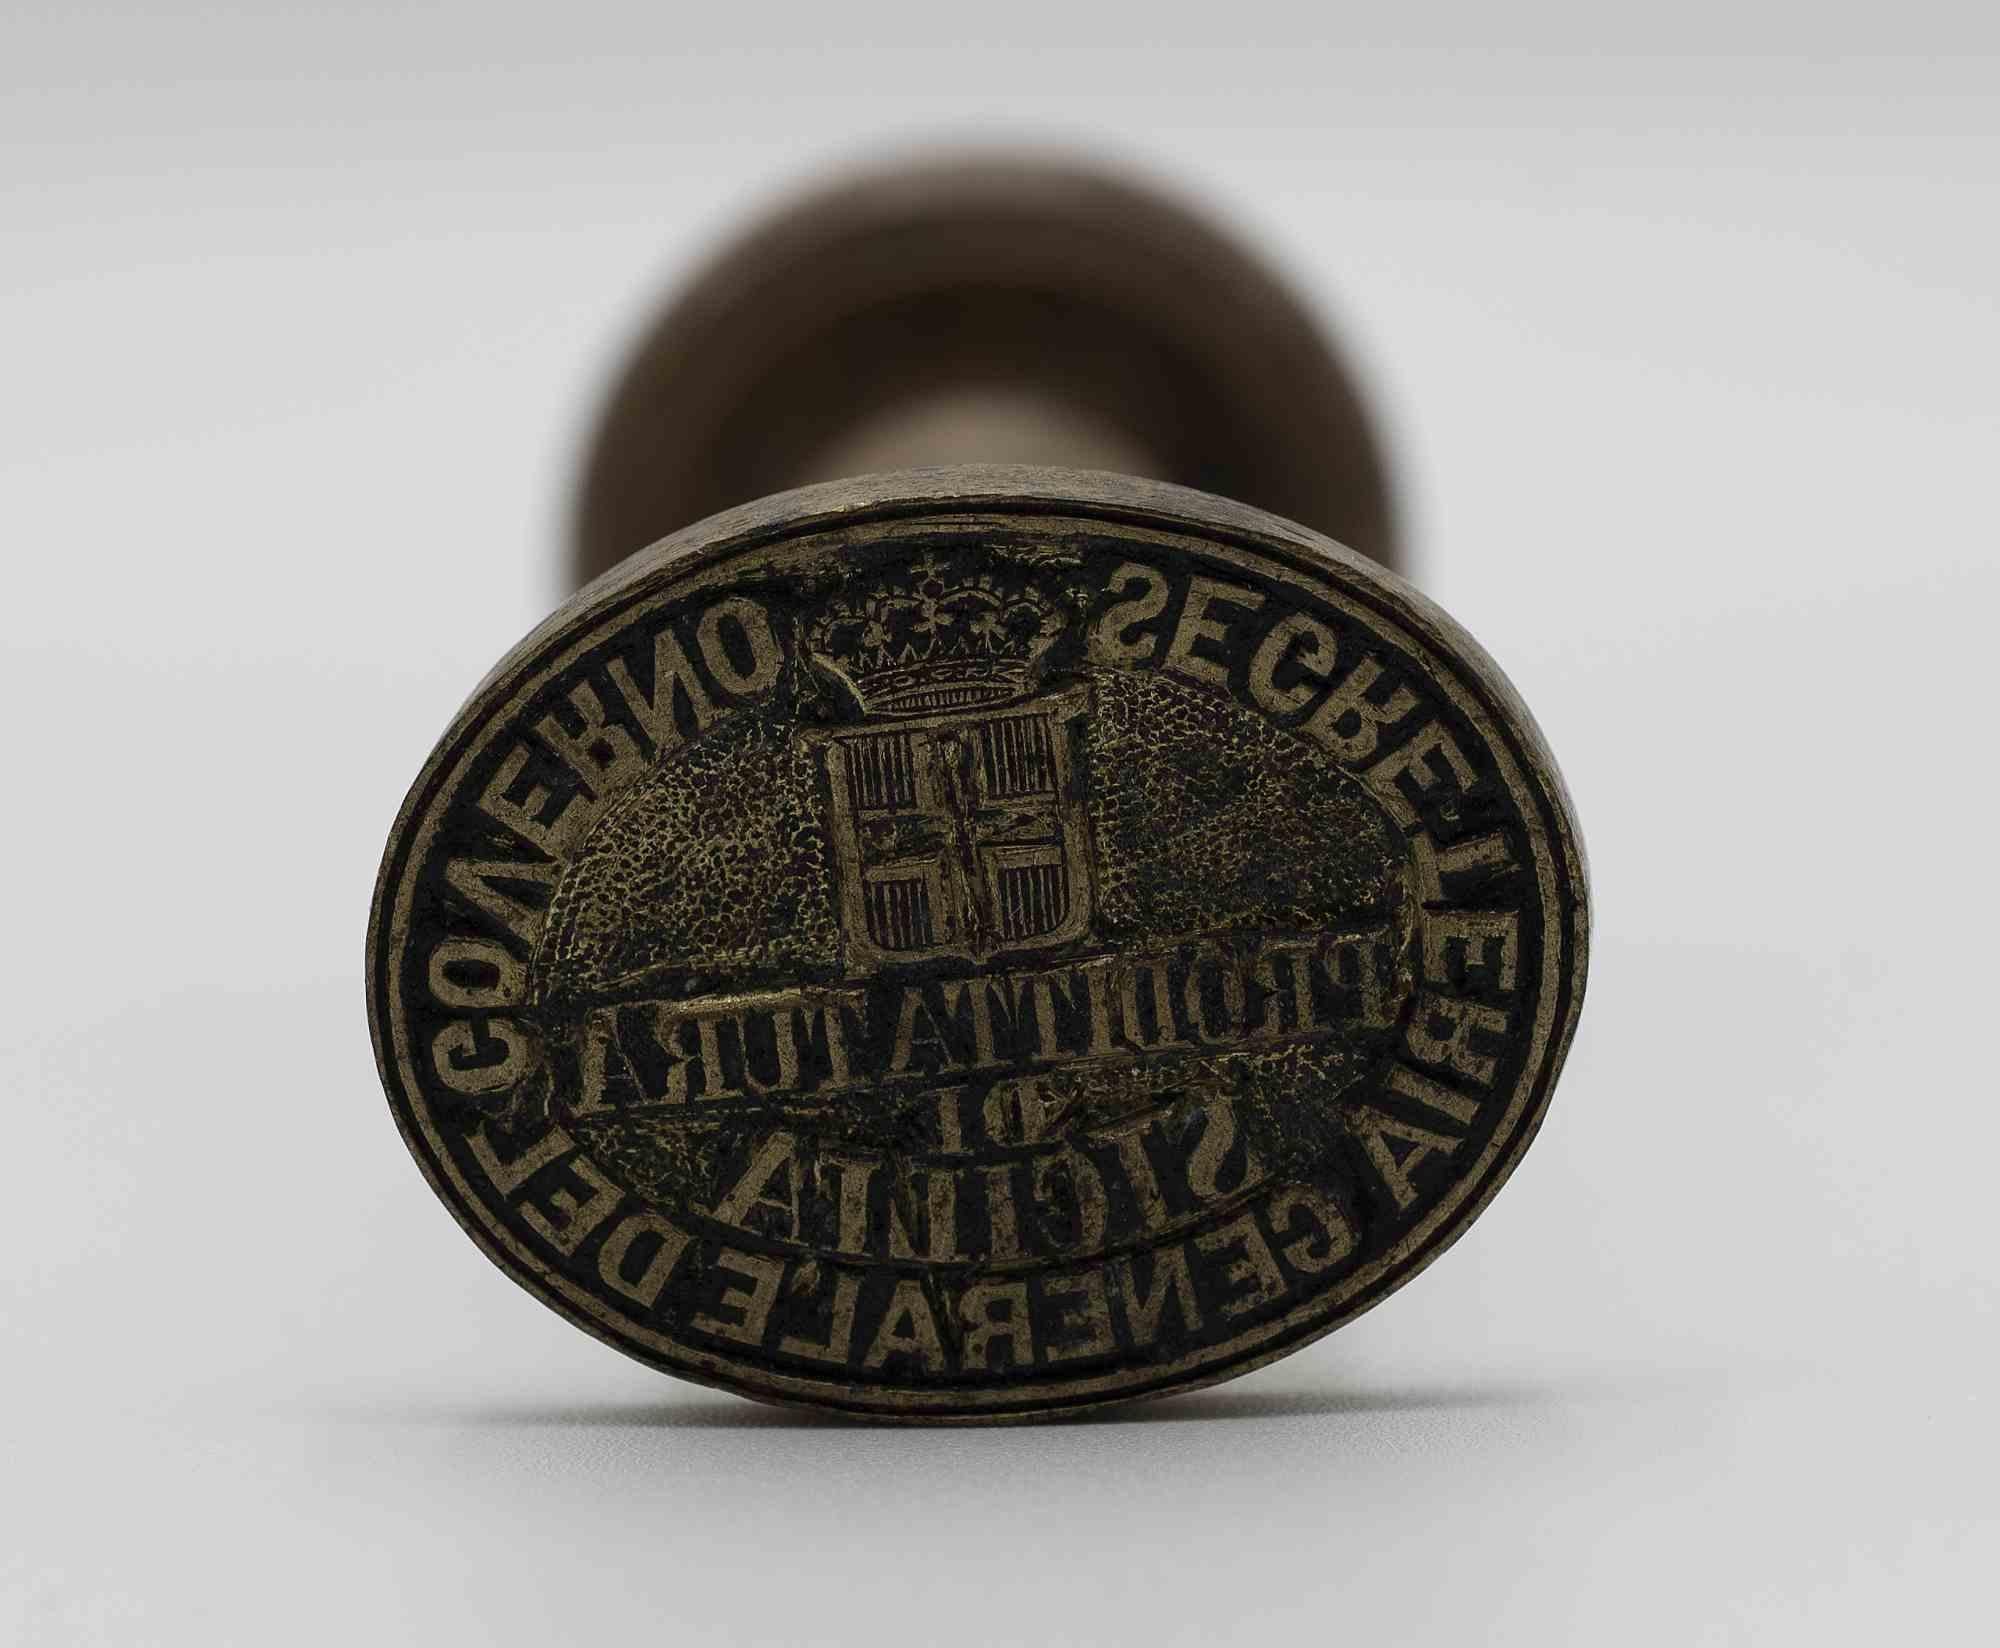 Metal stamp with wooden handle exhibited at the congress and systematic exhibition on Italian Risorgimento Art.

Text of the stamp General secretariat of the government. Prefecture of Sicily. 

Savoy coat of arms.

Measures: h10 x 4